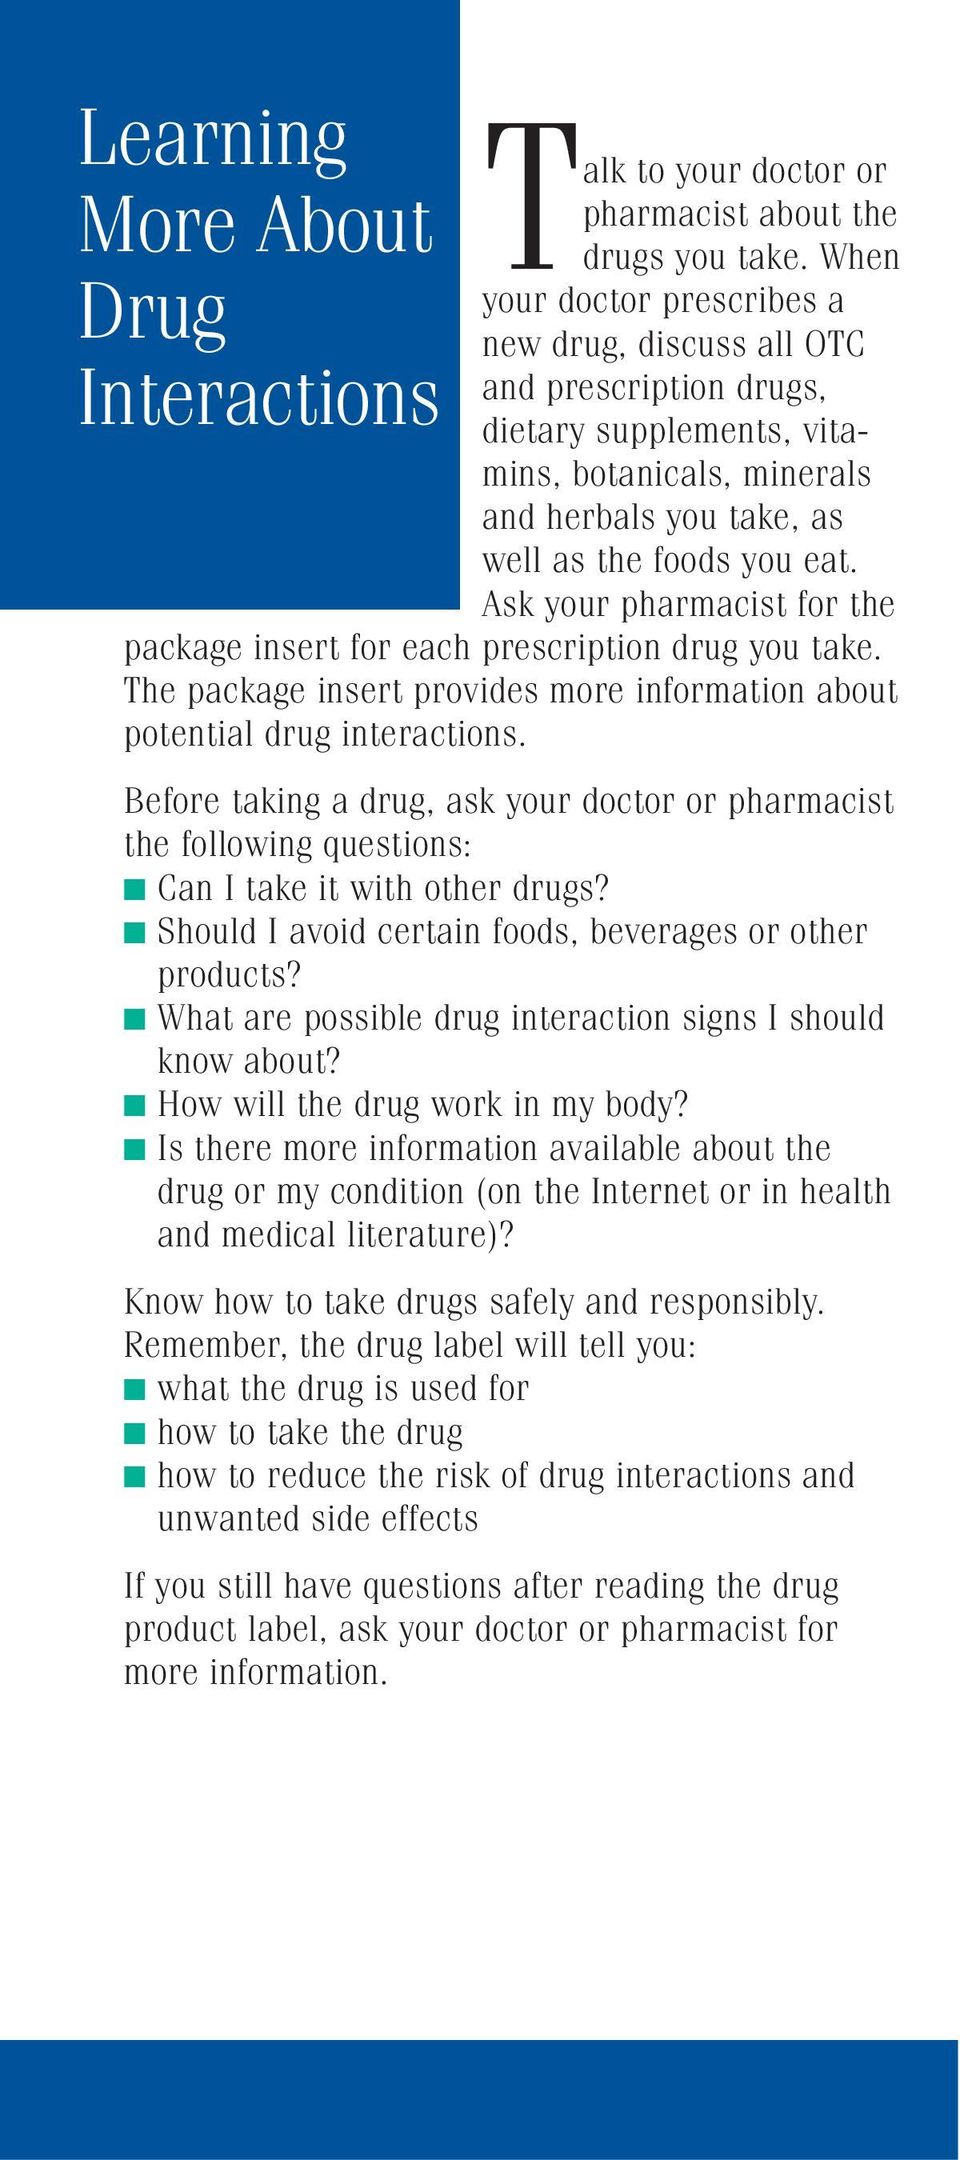 Ask your pharmacist for the package insert for each prescription drug you take. The package insert provides more information about potential drug interactions.